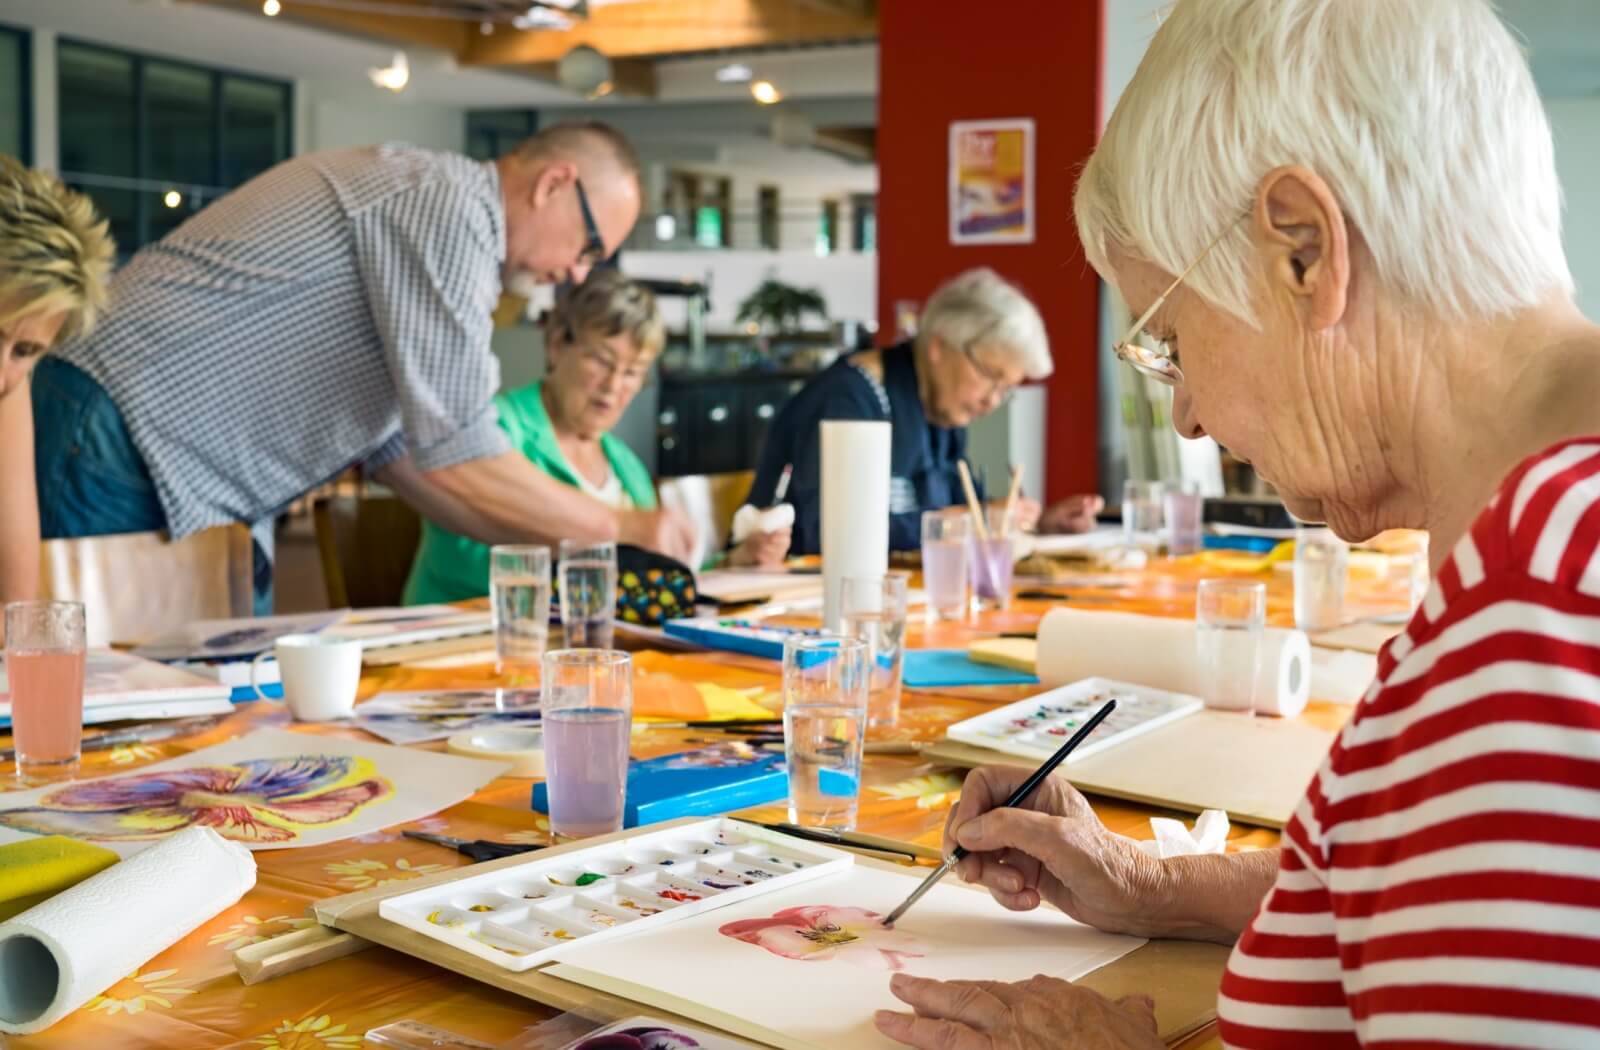 A group of older adults created a painting as a part of their art class.